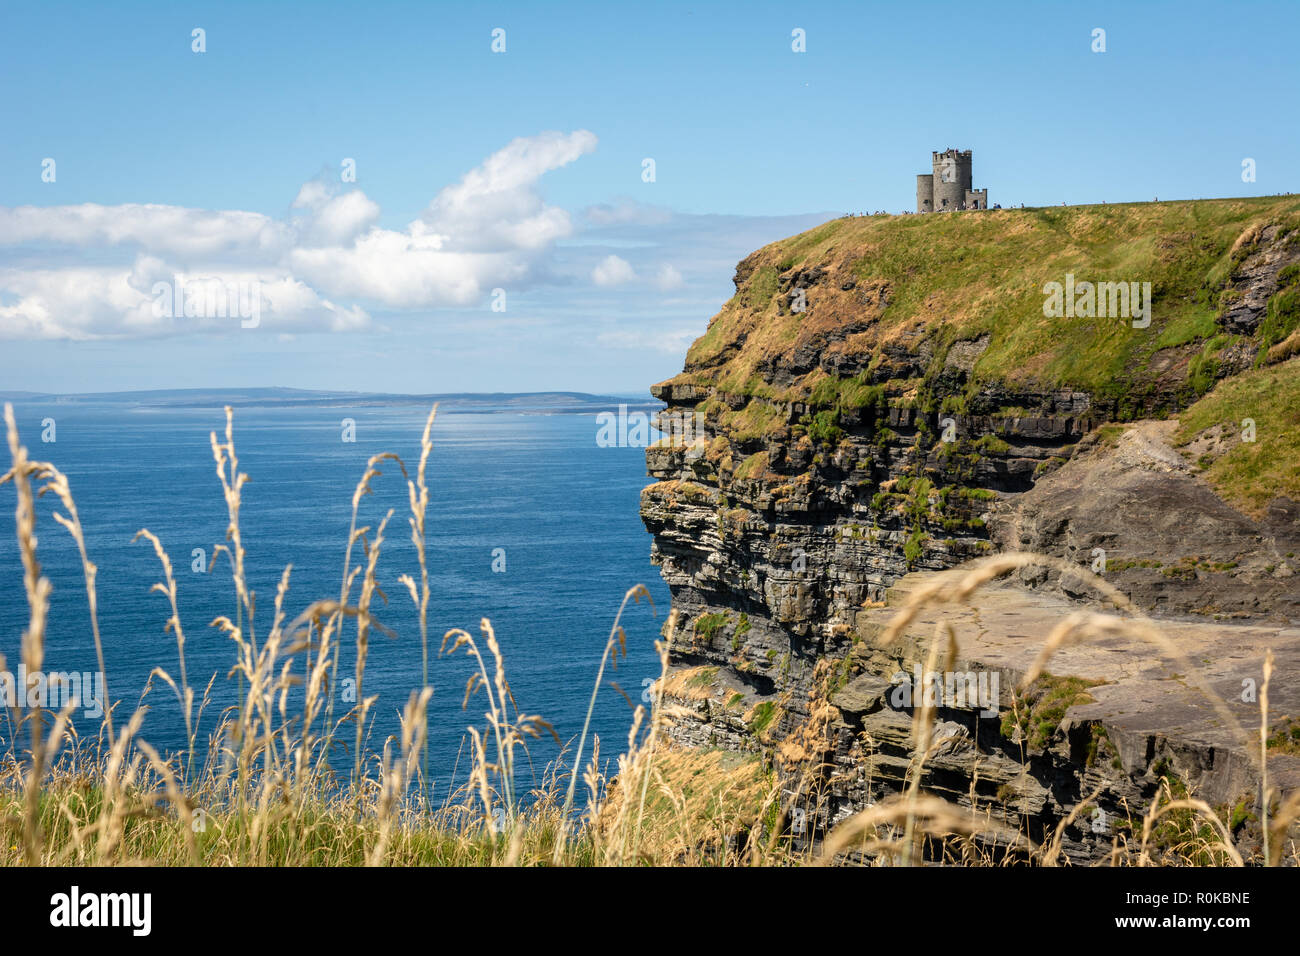 A view of O'Brien's Tower on top of the Cliffs of Moher overlooking the Atlantic ocean and Aran Islands on west coast of Ireland Stock Photo